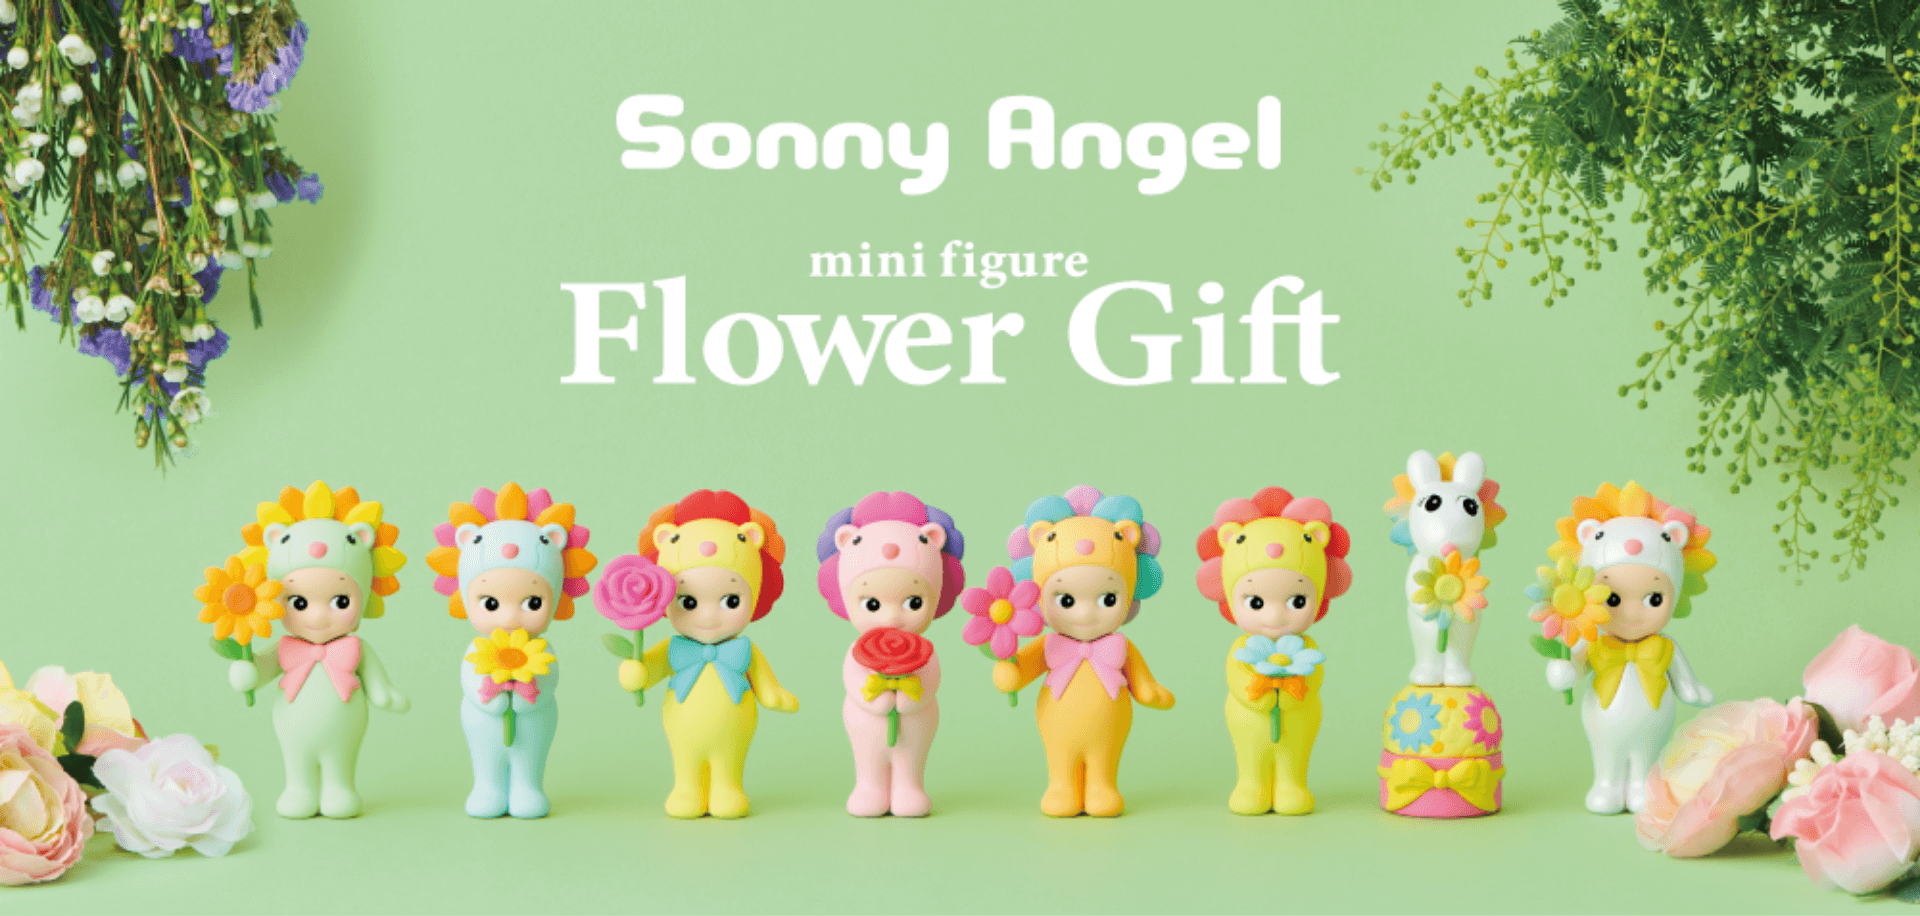 New Release：Show your feelings with a Sonny Angel Flower Gift